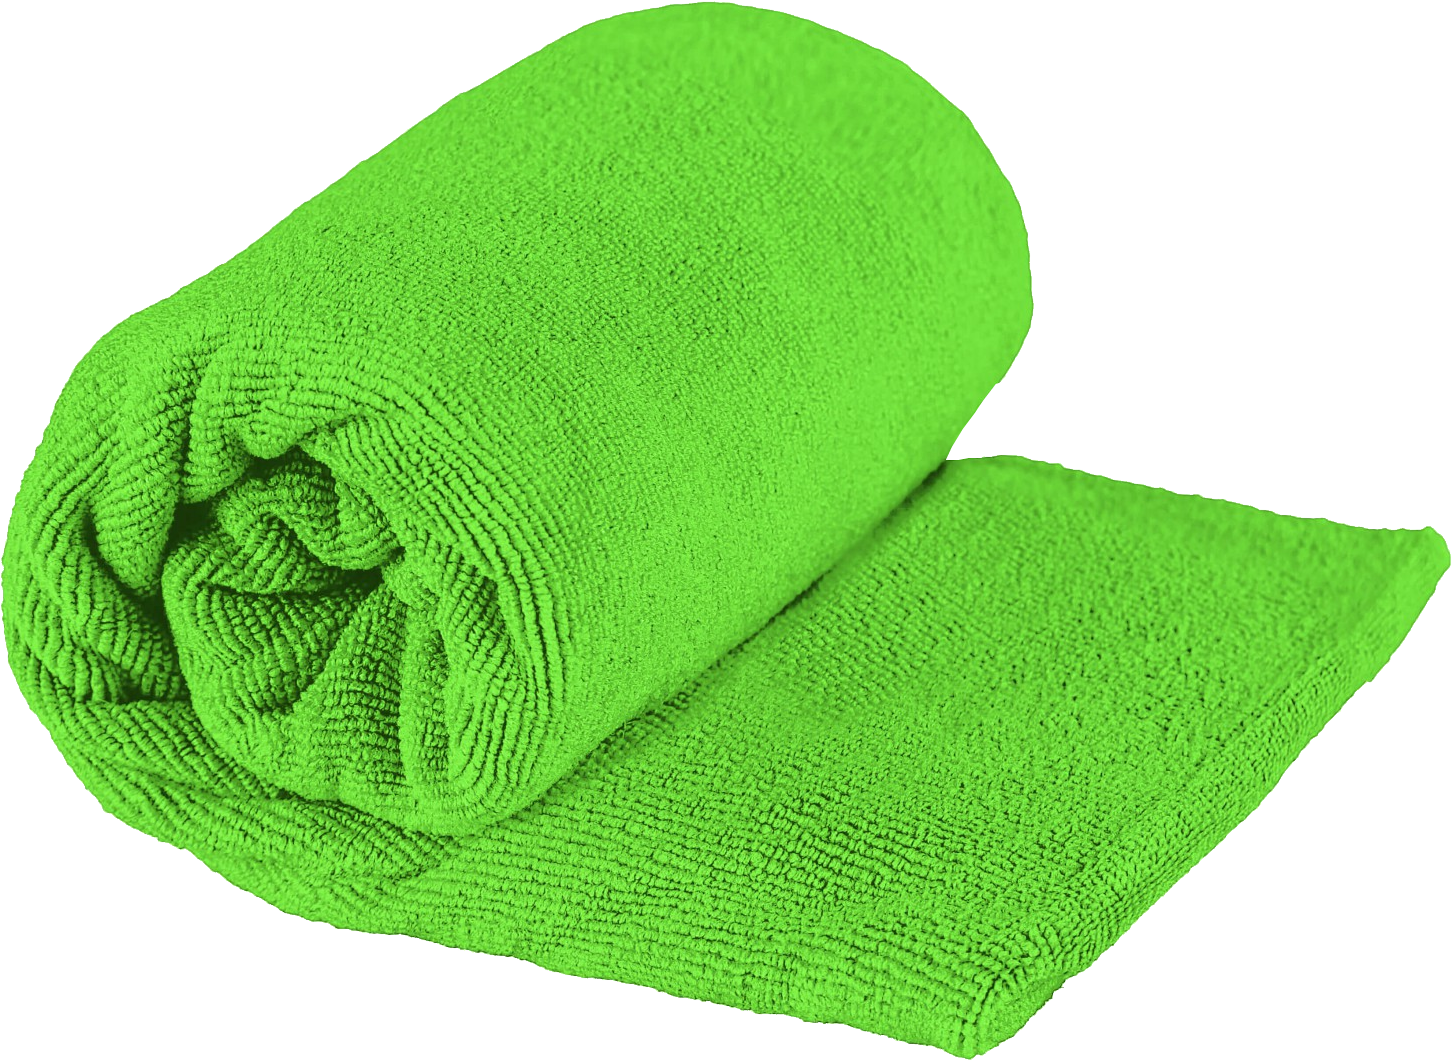 Towel png images.